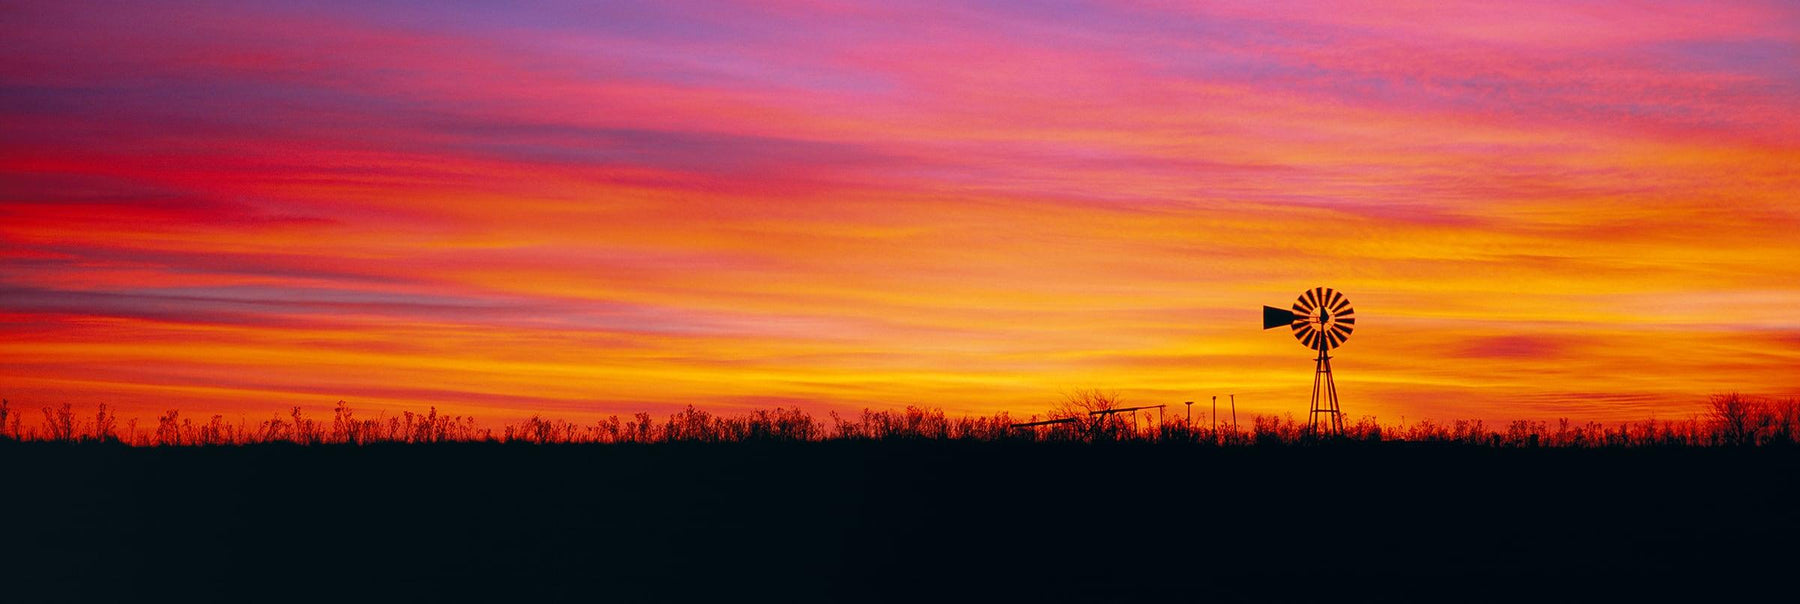 Silhouette of a single windmill and brush field during a colorful sunset in Elk City Oklahoma